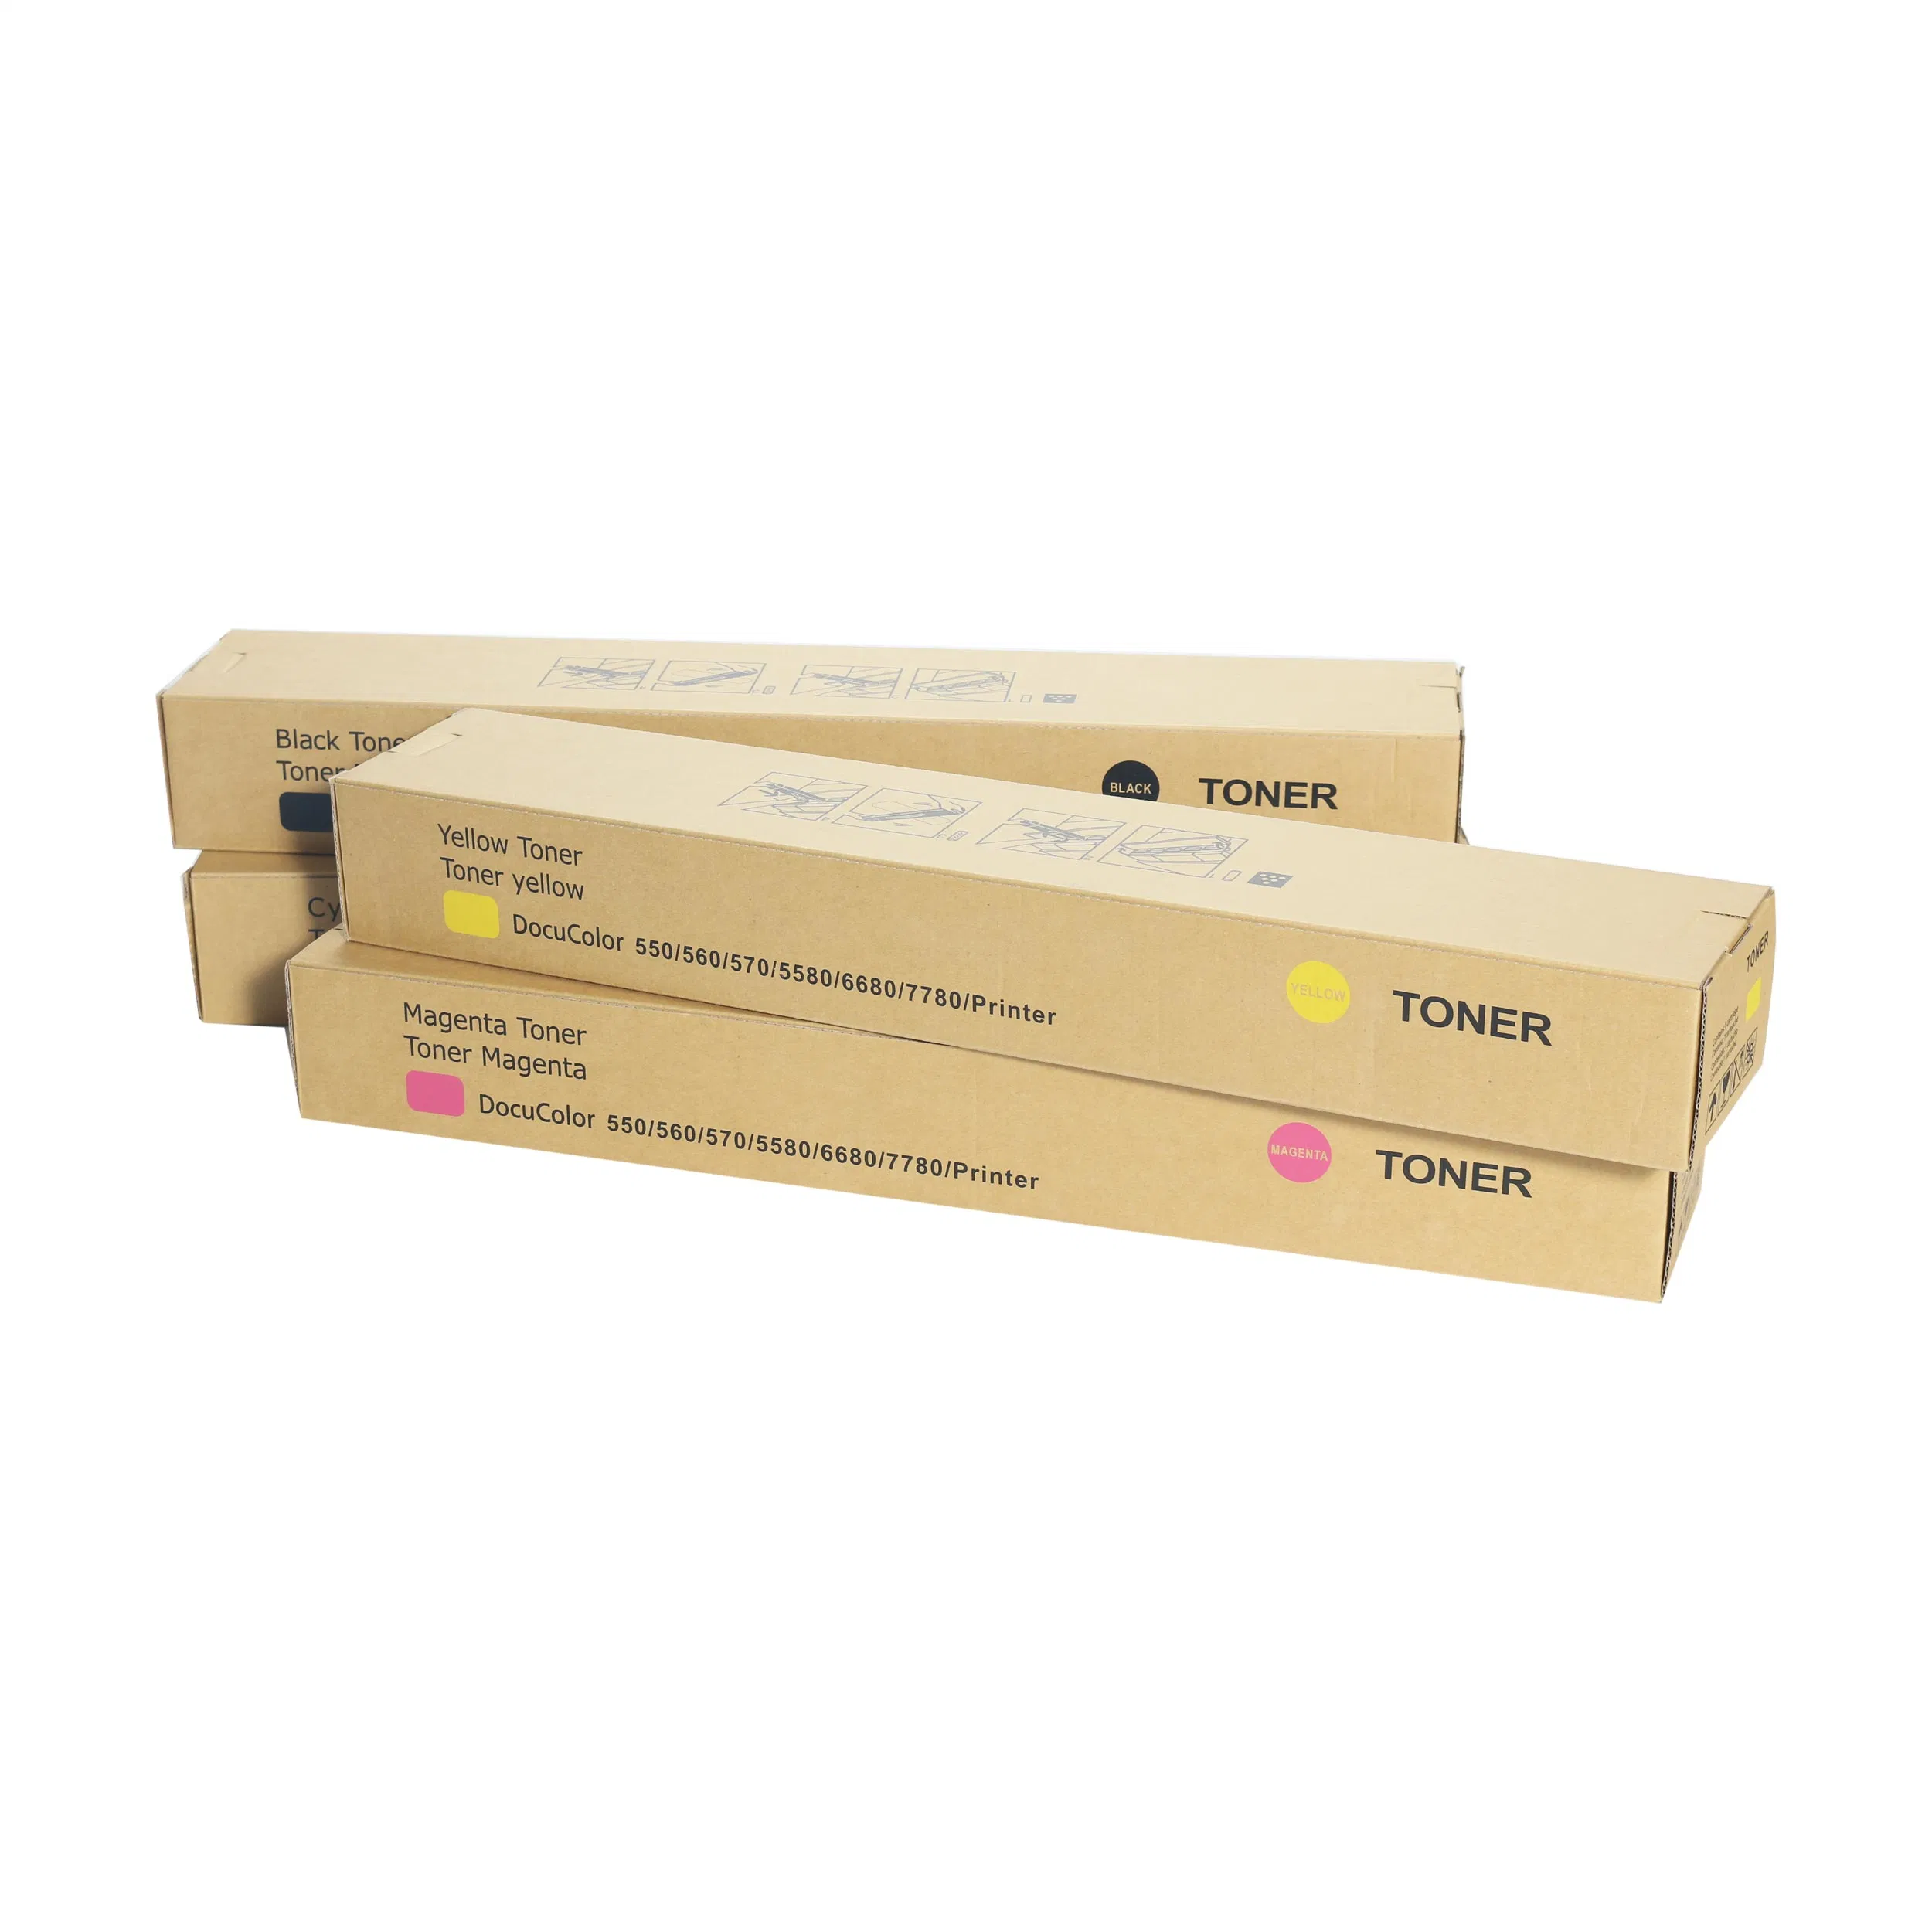 New Compatible Color Toner for Xerox Docucolor 550/560/570/5580/6680/7780